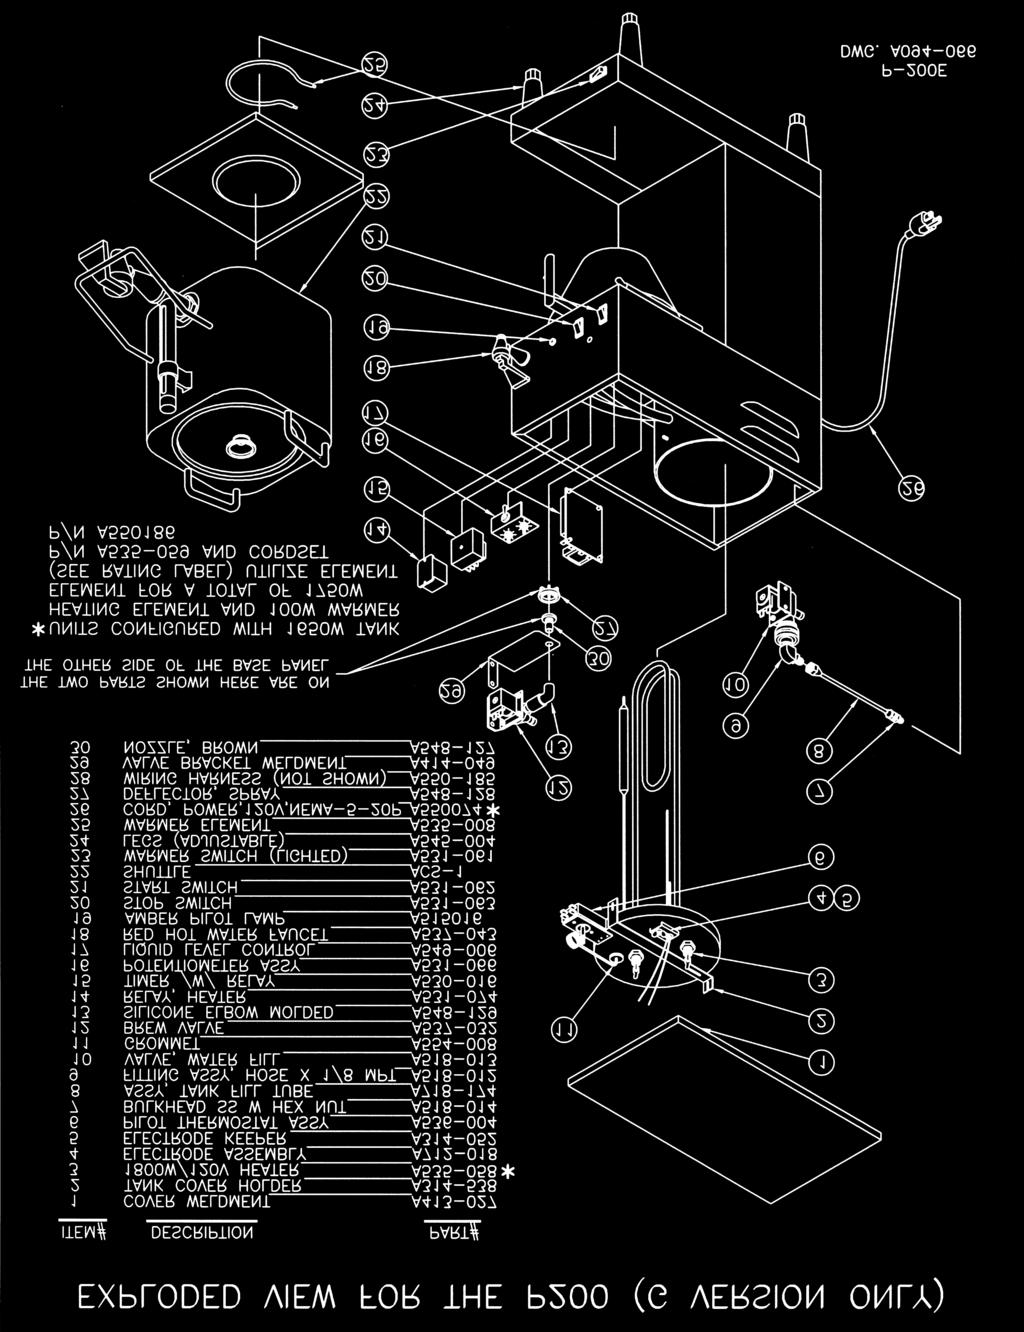 Parts Diagram and List (continued)